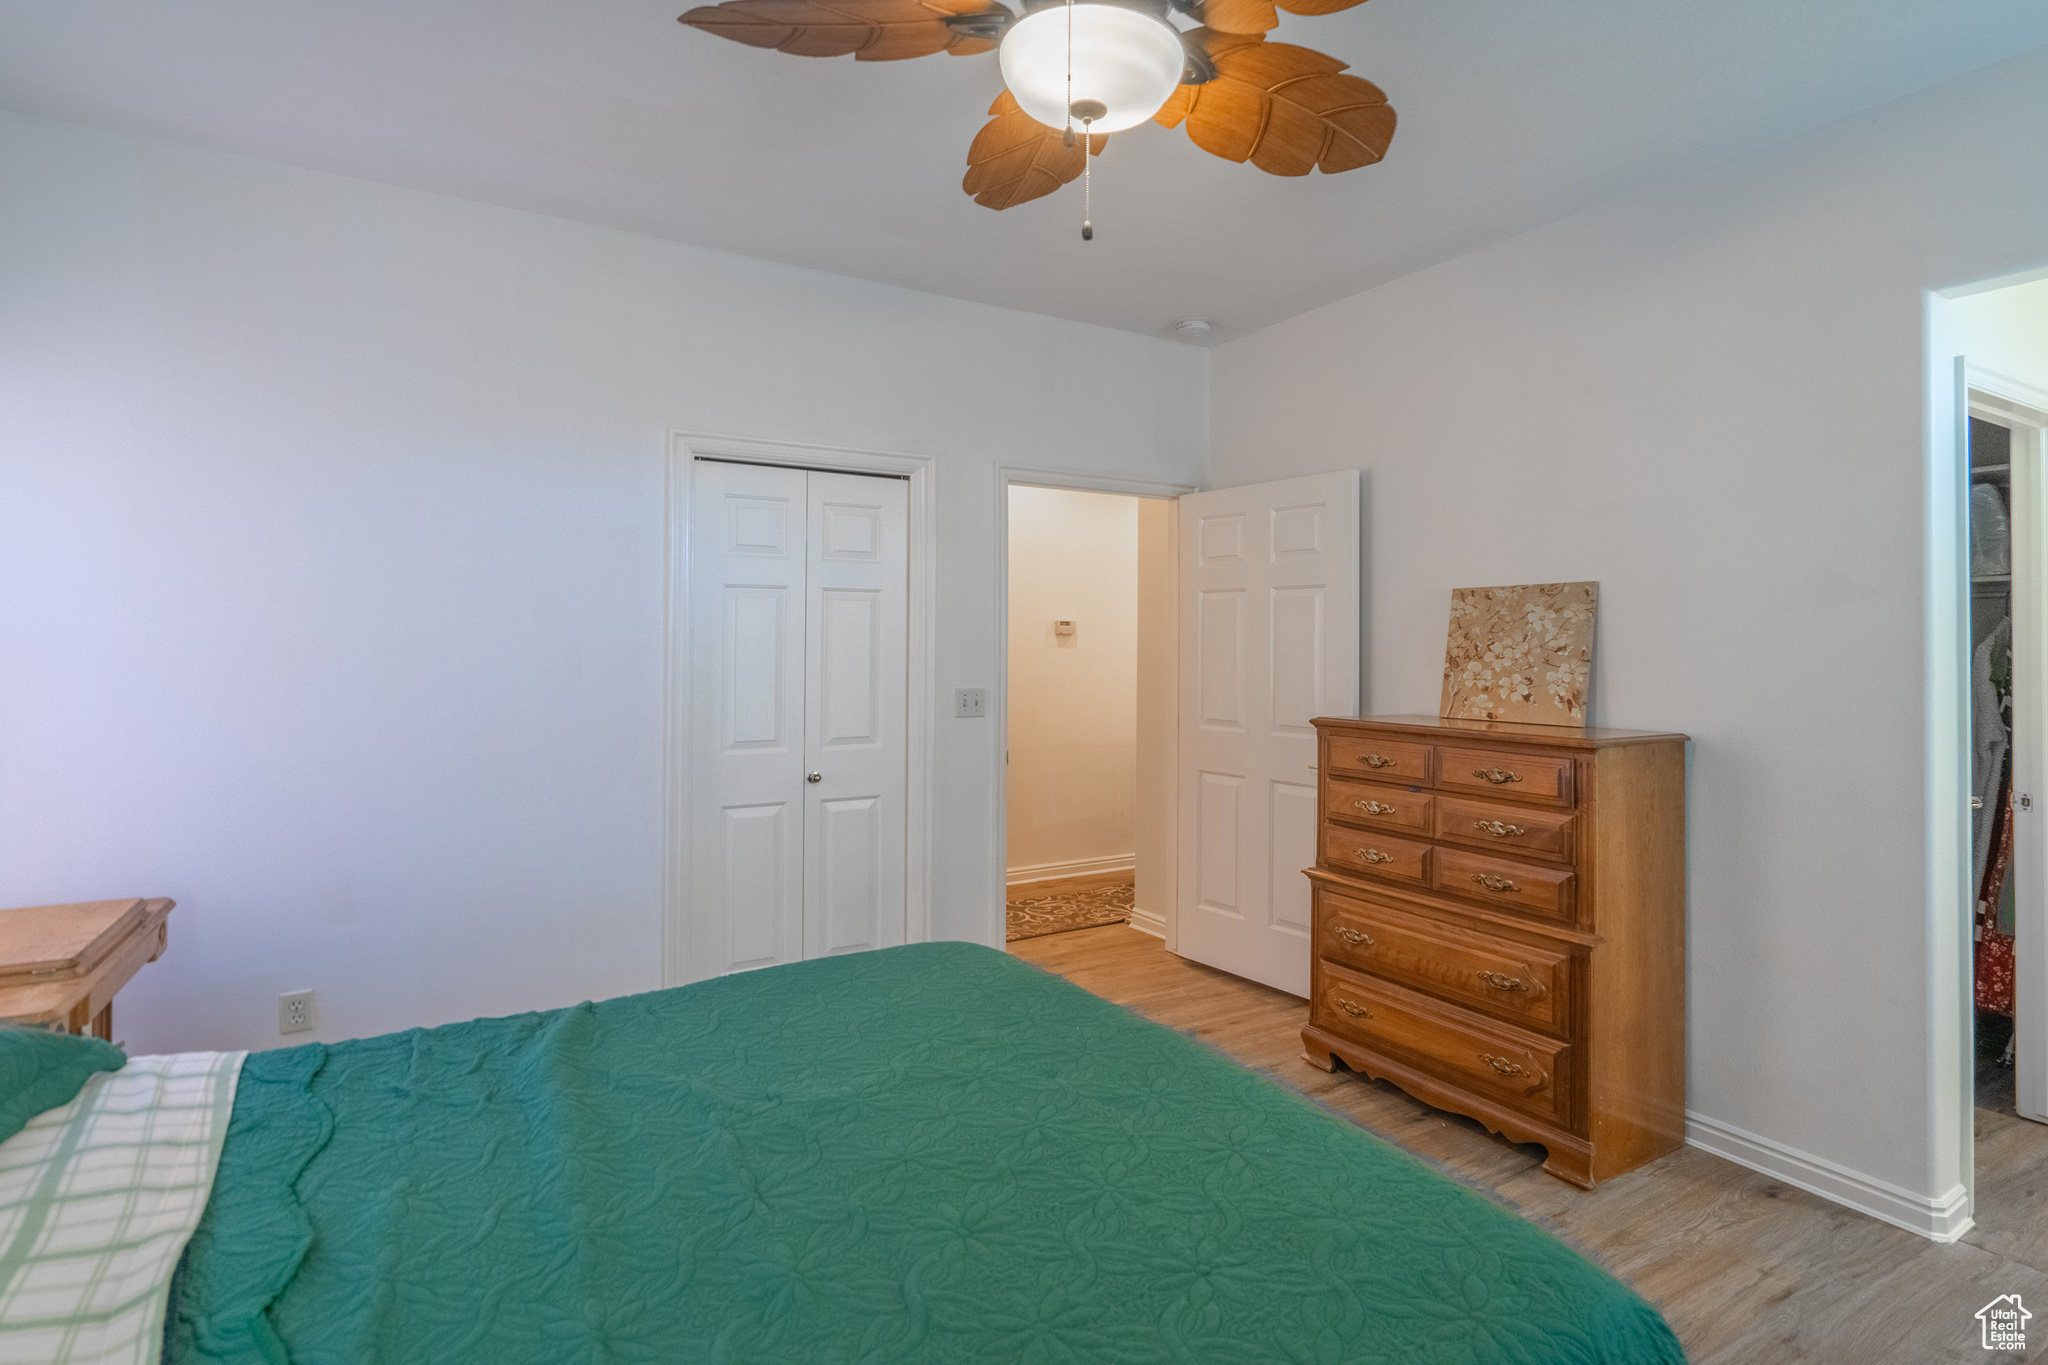 Bedroom with ceiling fan, a closet, and light wood-type flooring